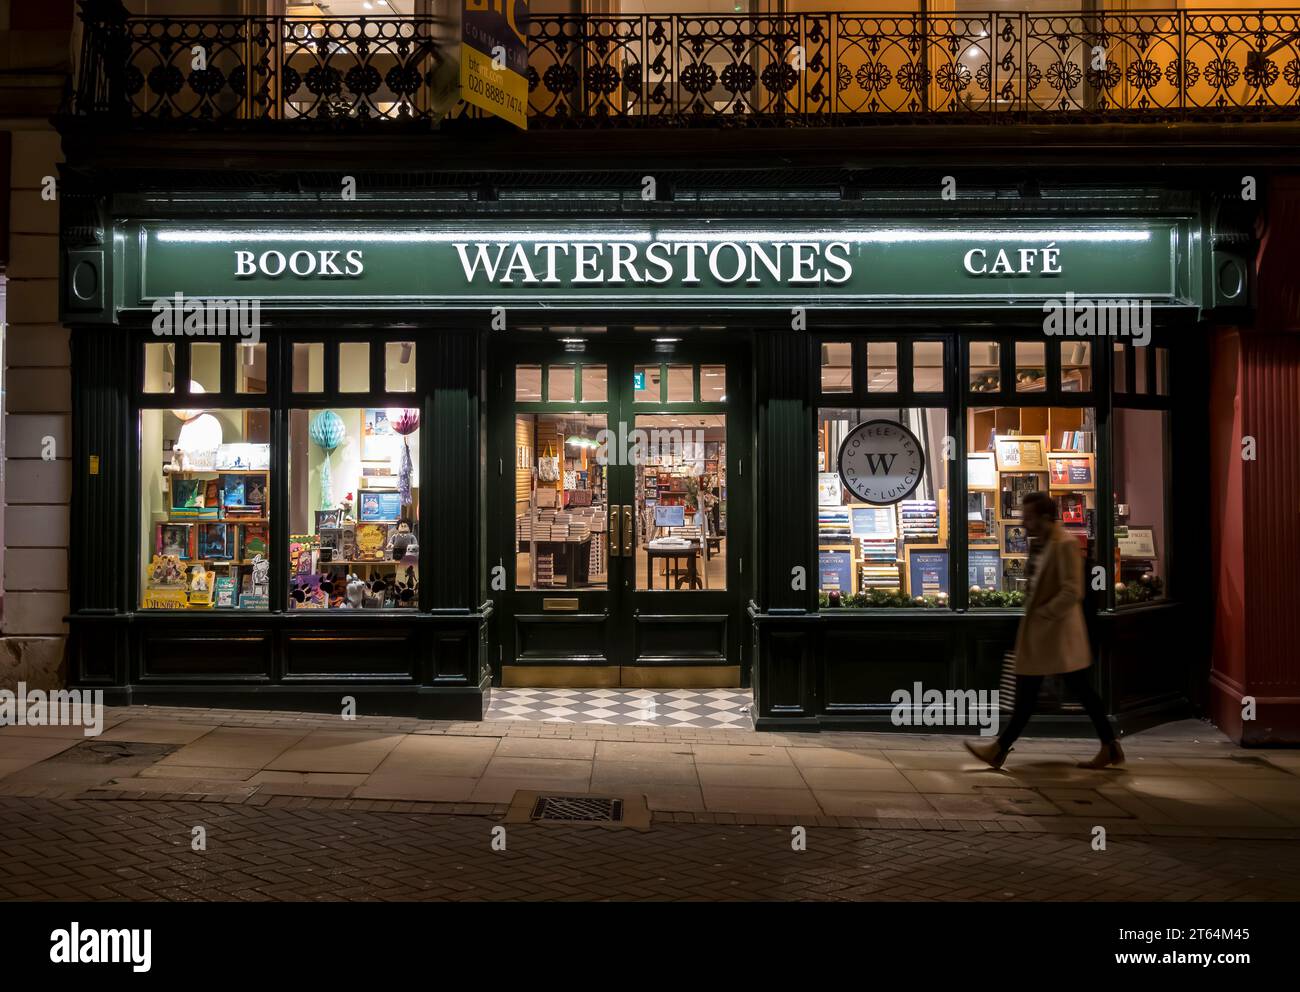 Waterstones shop front lit up at night, High Street, Lincoln City, Lincolnshire, England, UK Stock Photo